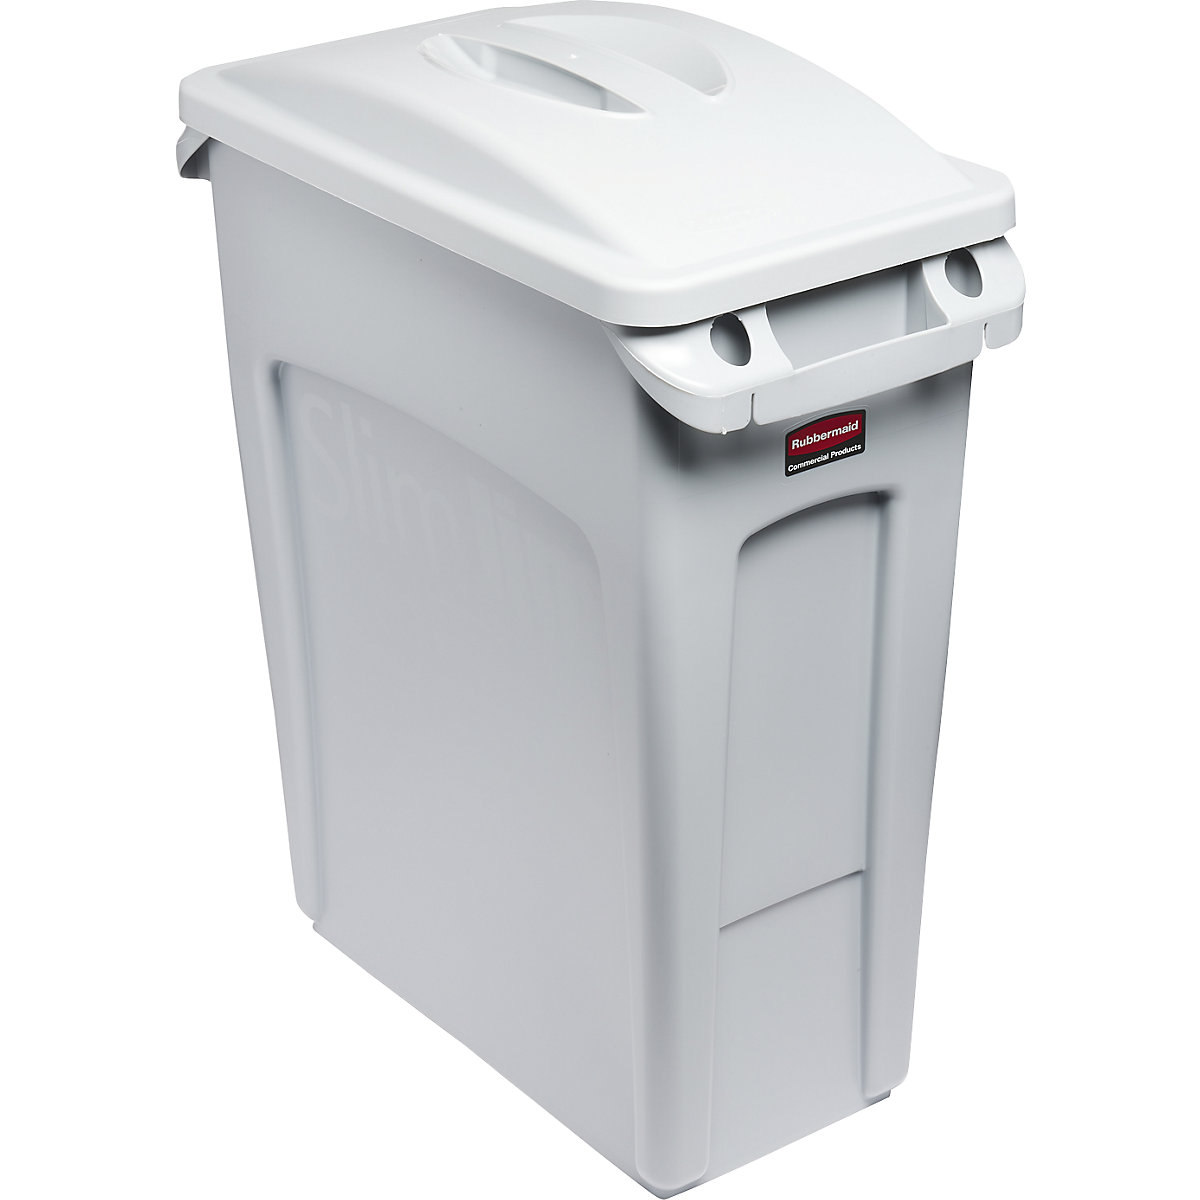 SLIM JIM® recyclable waste collector – Rubbermaid